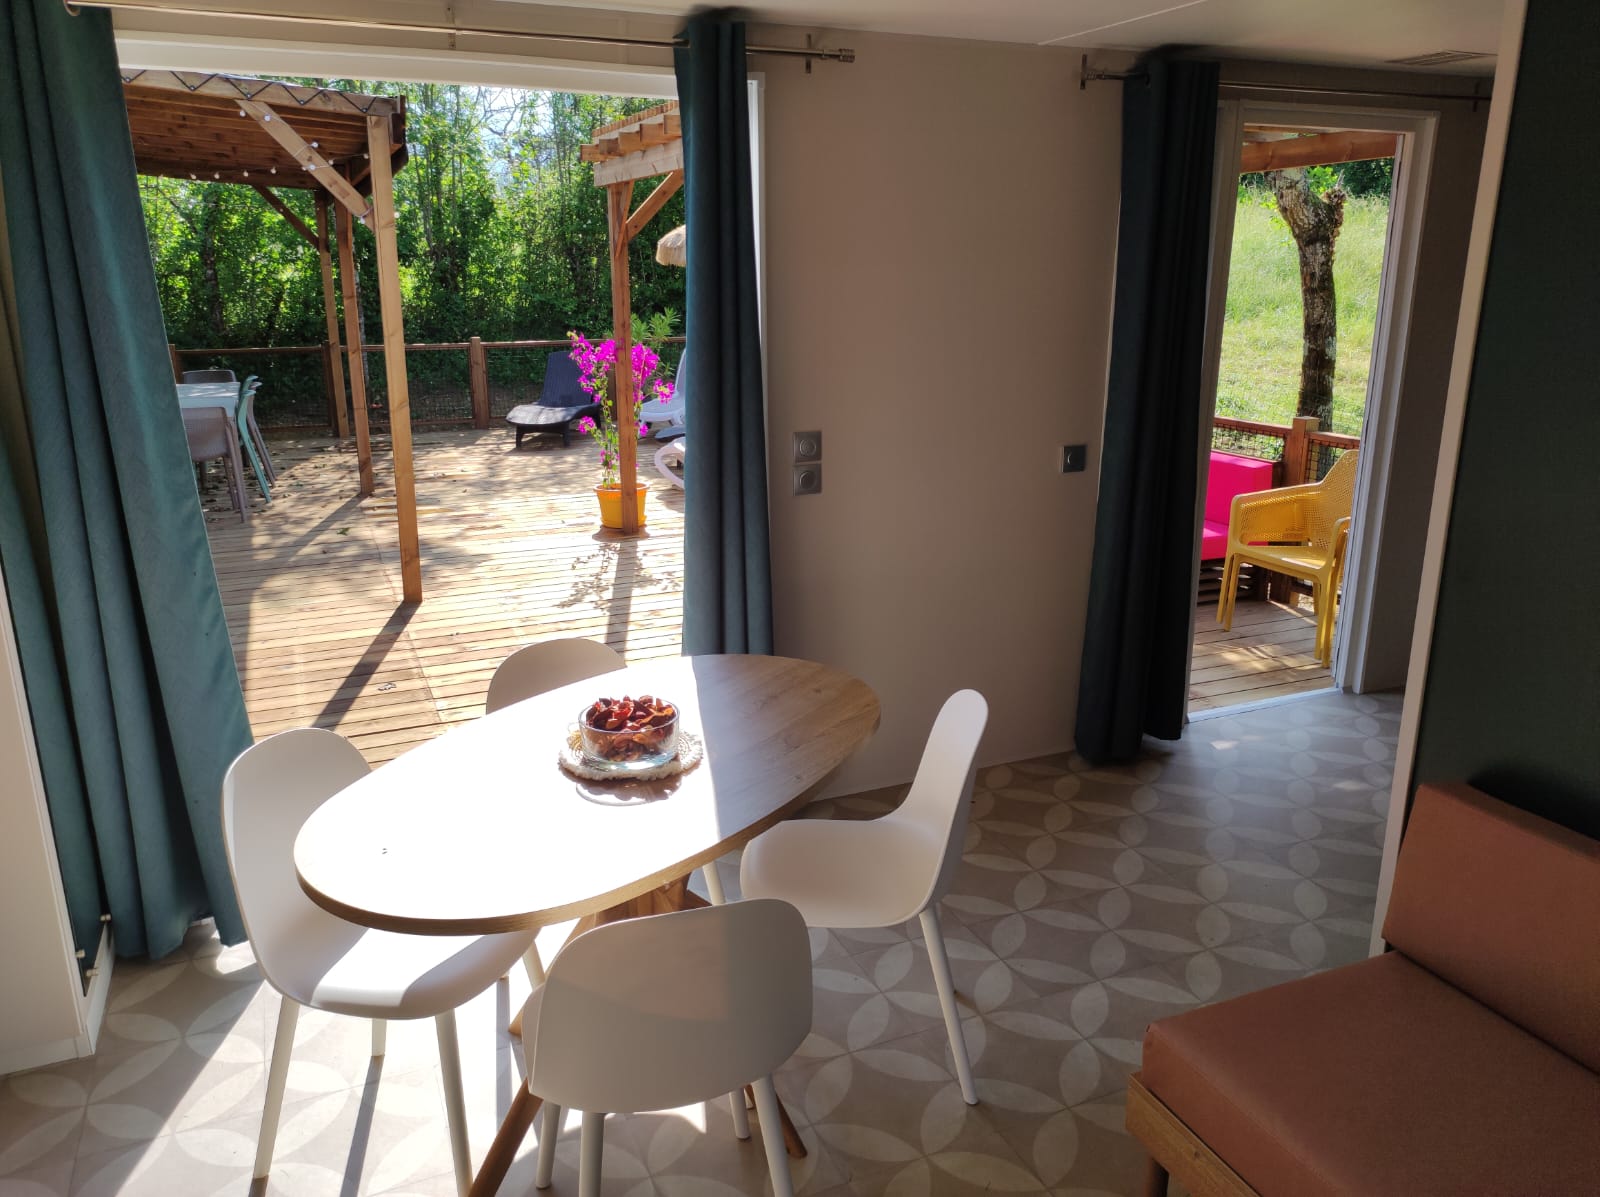 Location - Cottage 2 Chambres, Prestige - Camping Padimadour